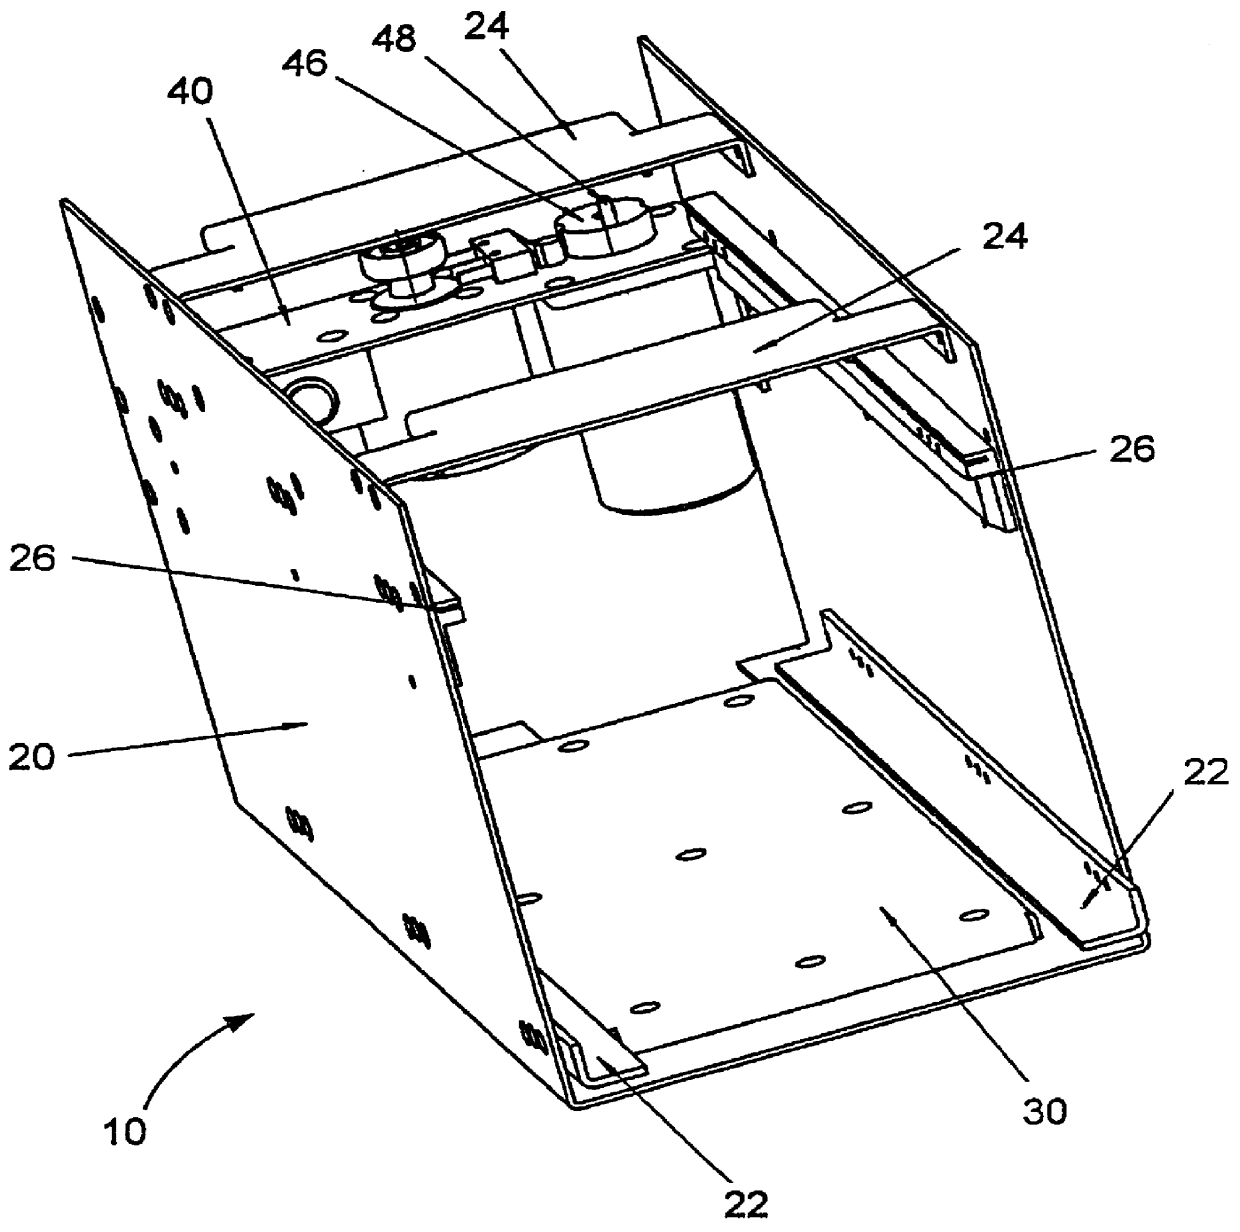 Device and method for coin packaging